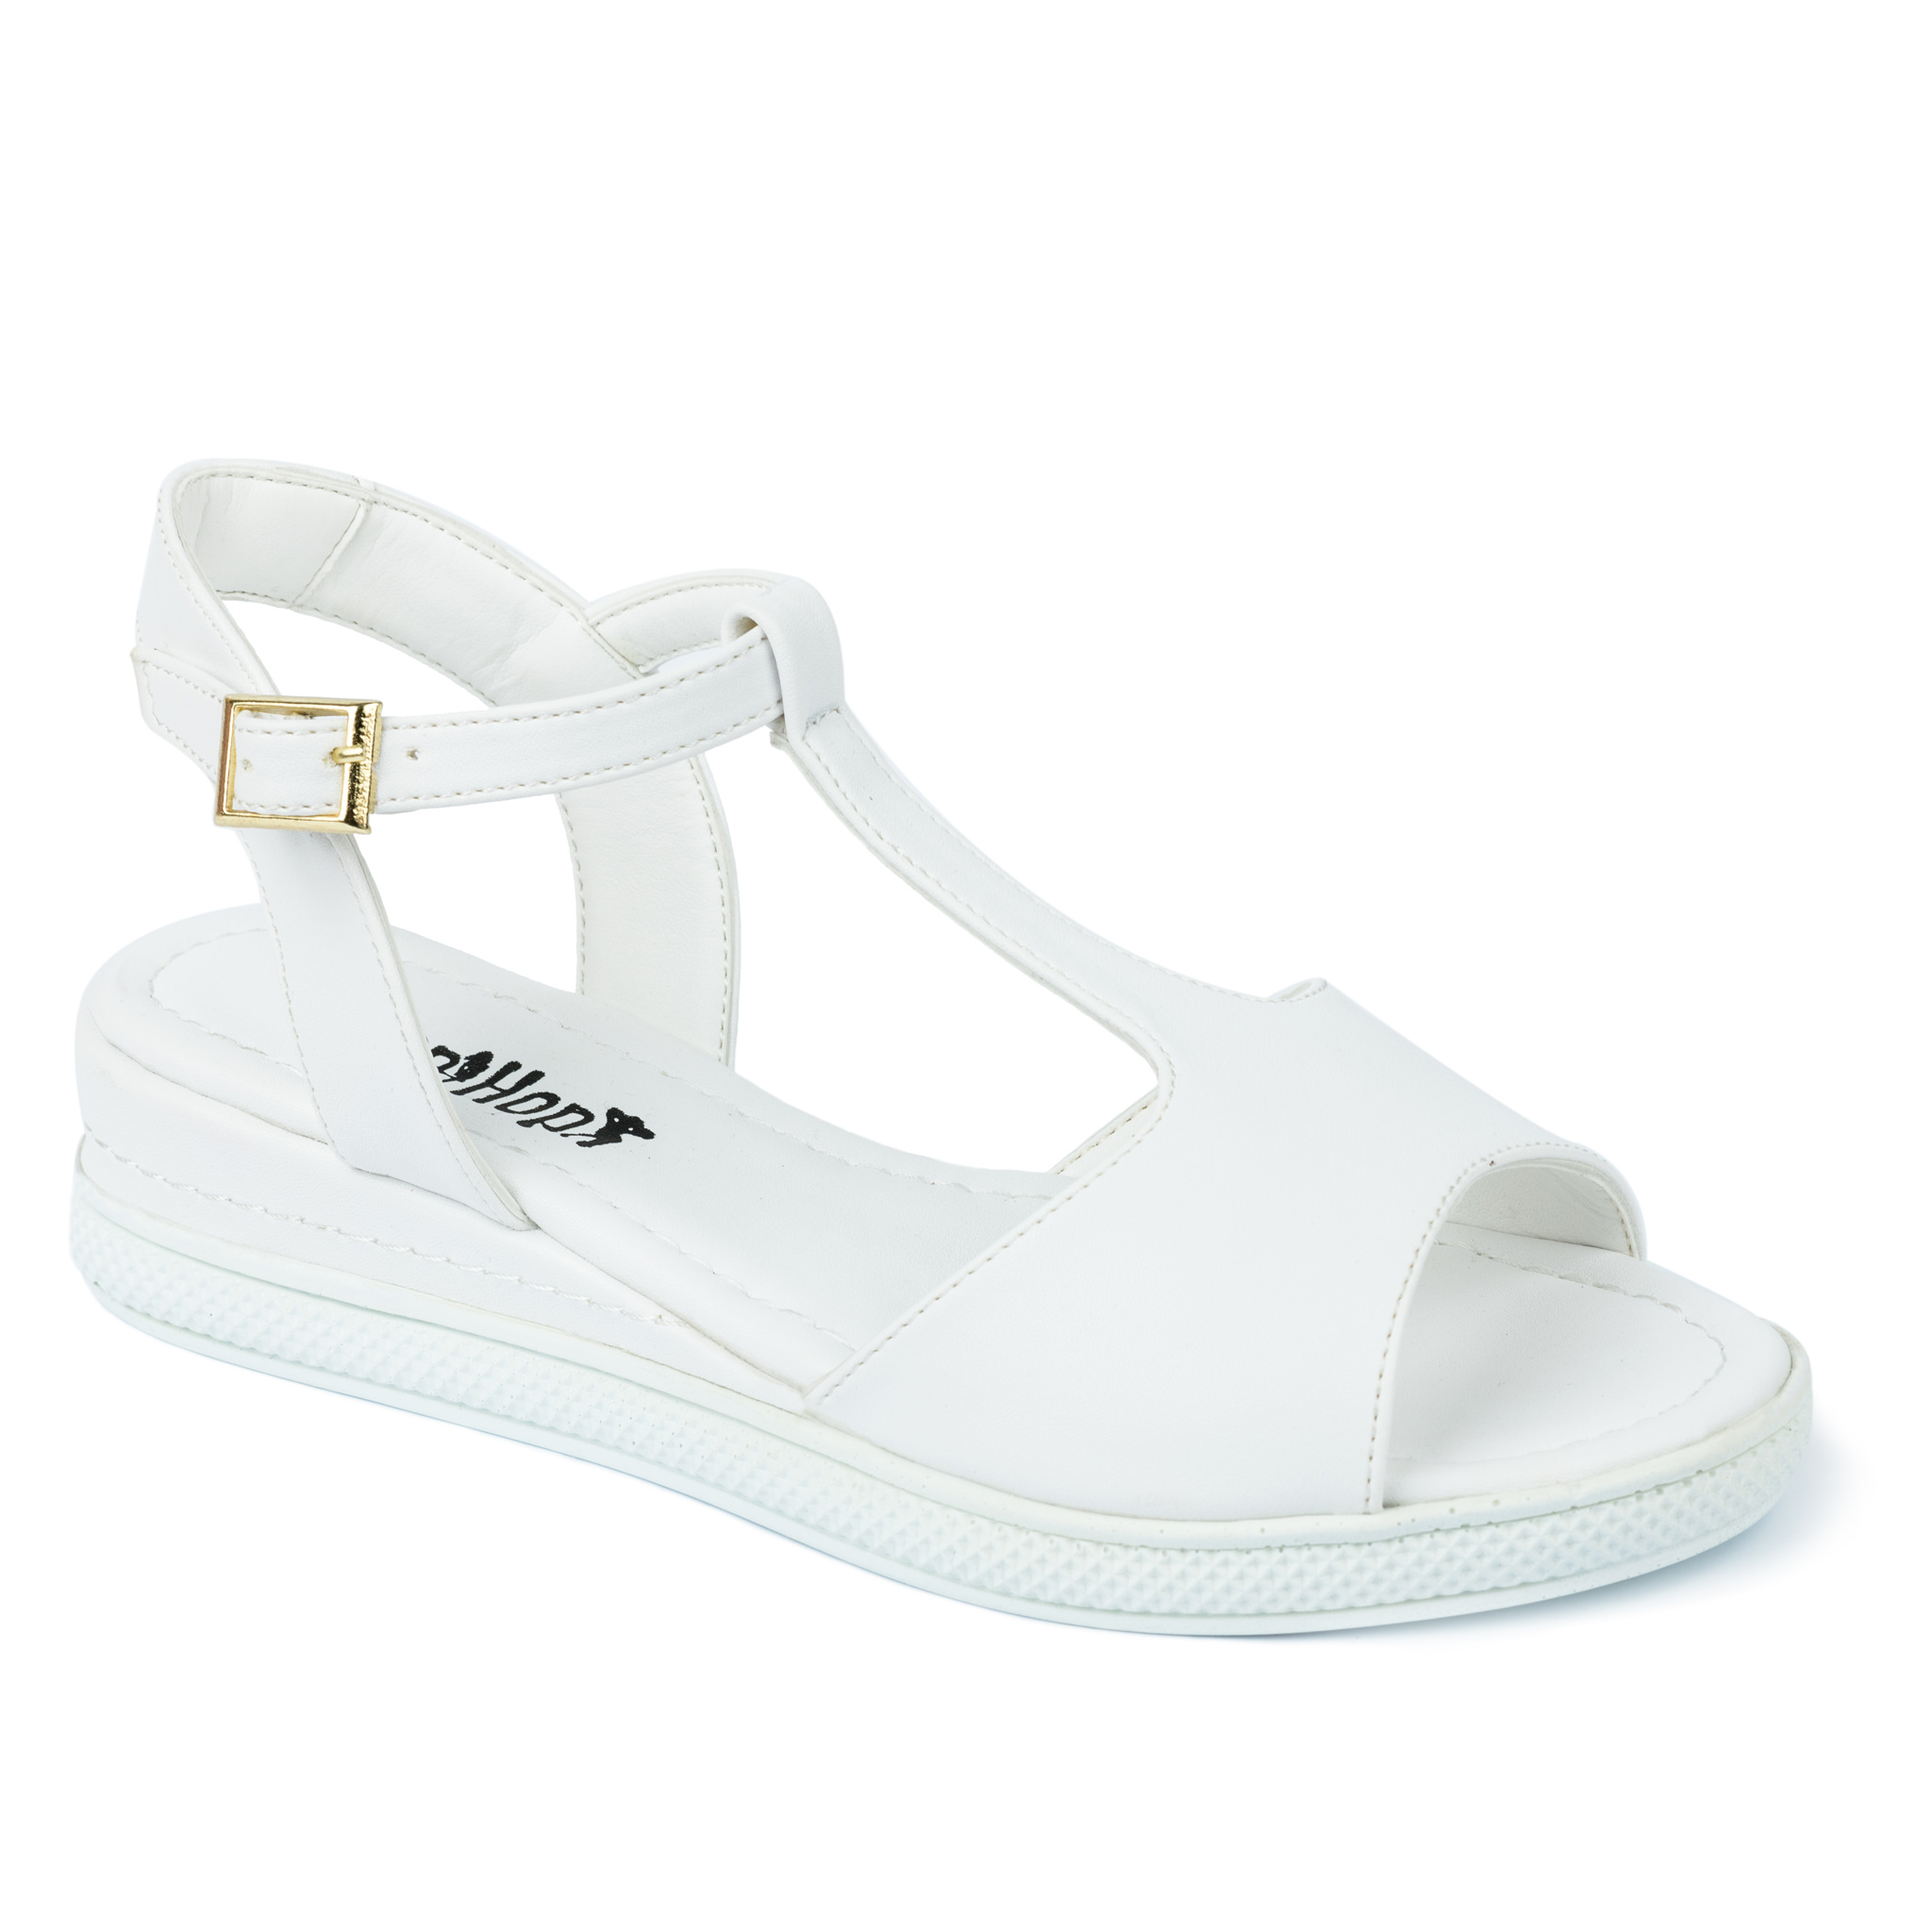 HIGH SOLE SANDALS WITH BELT - WHITE